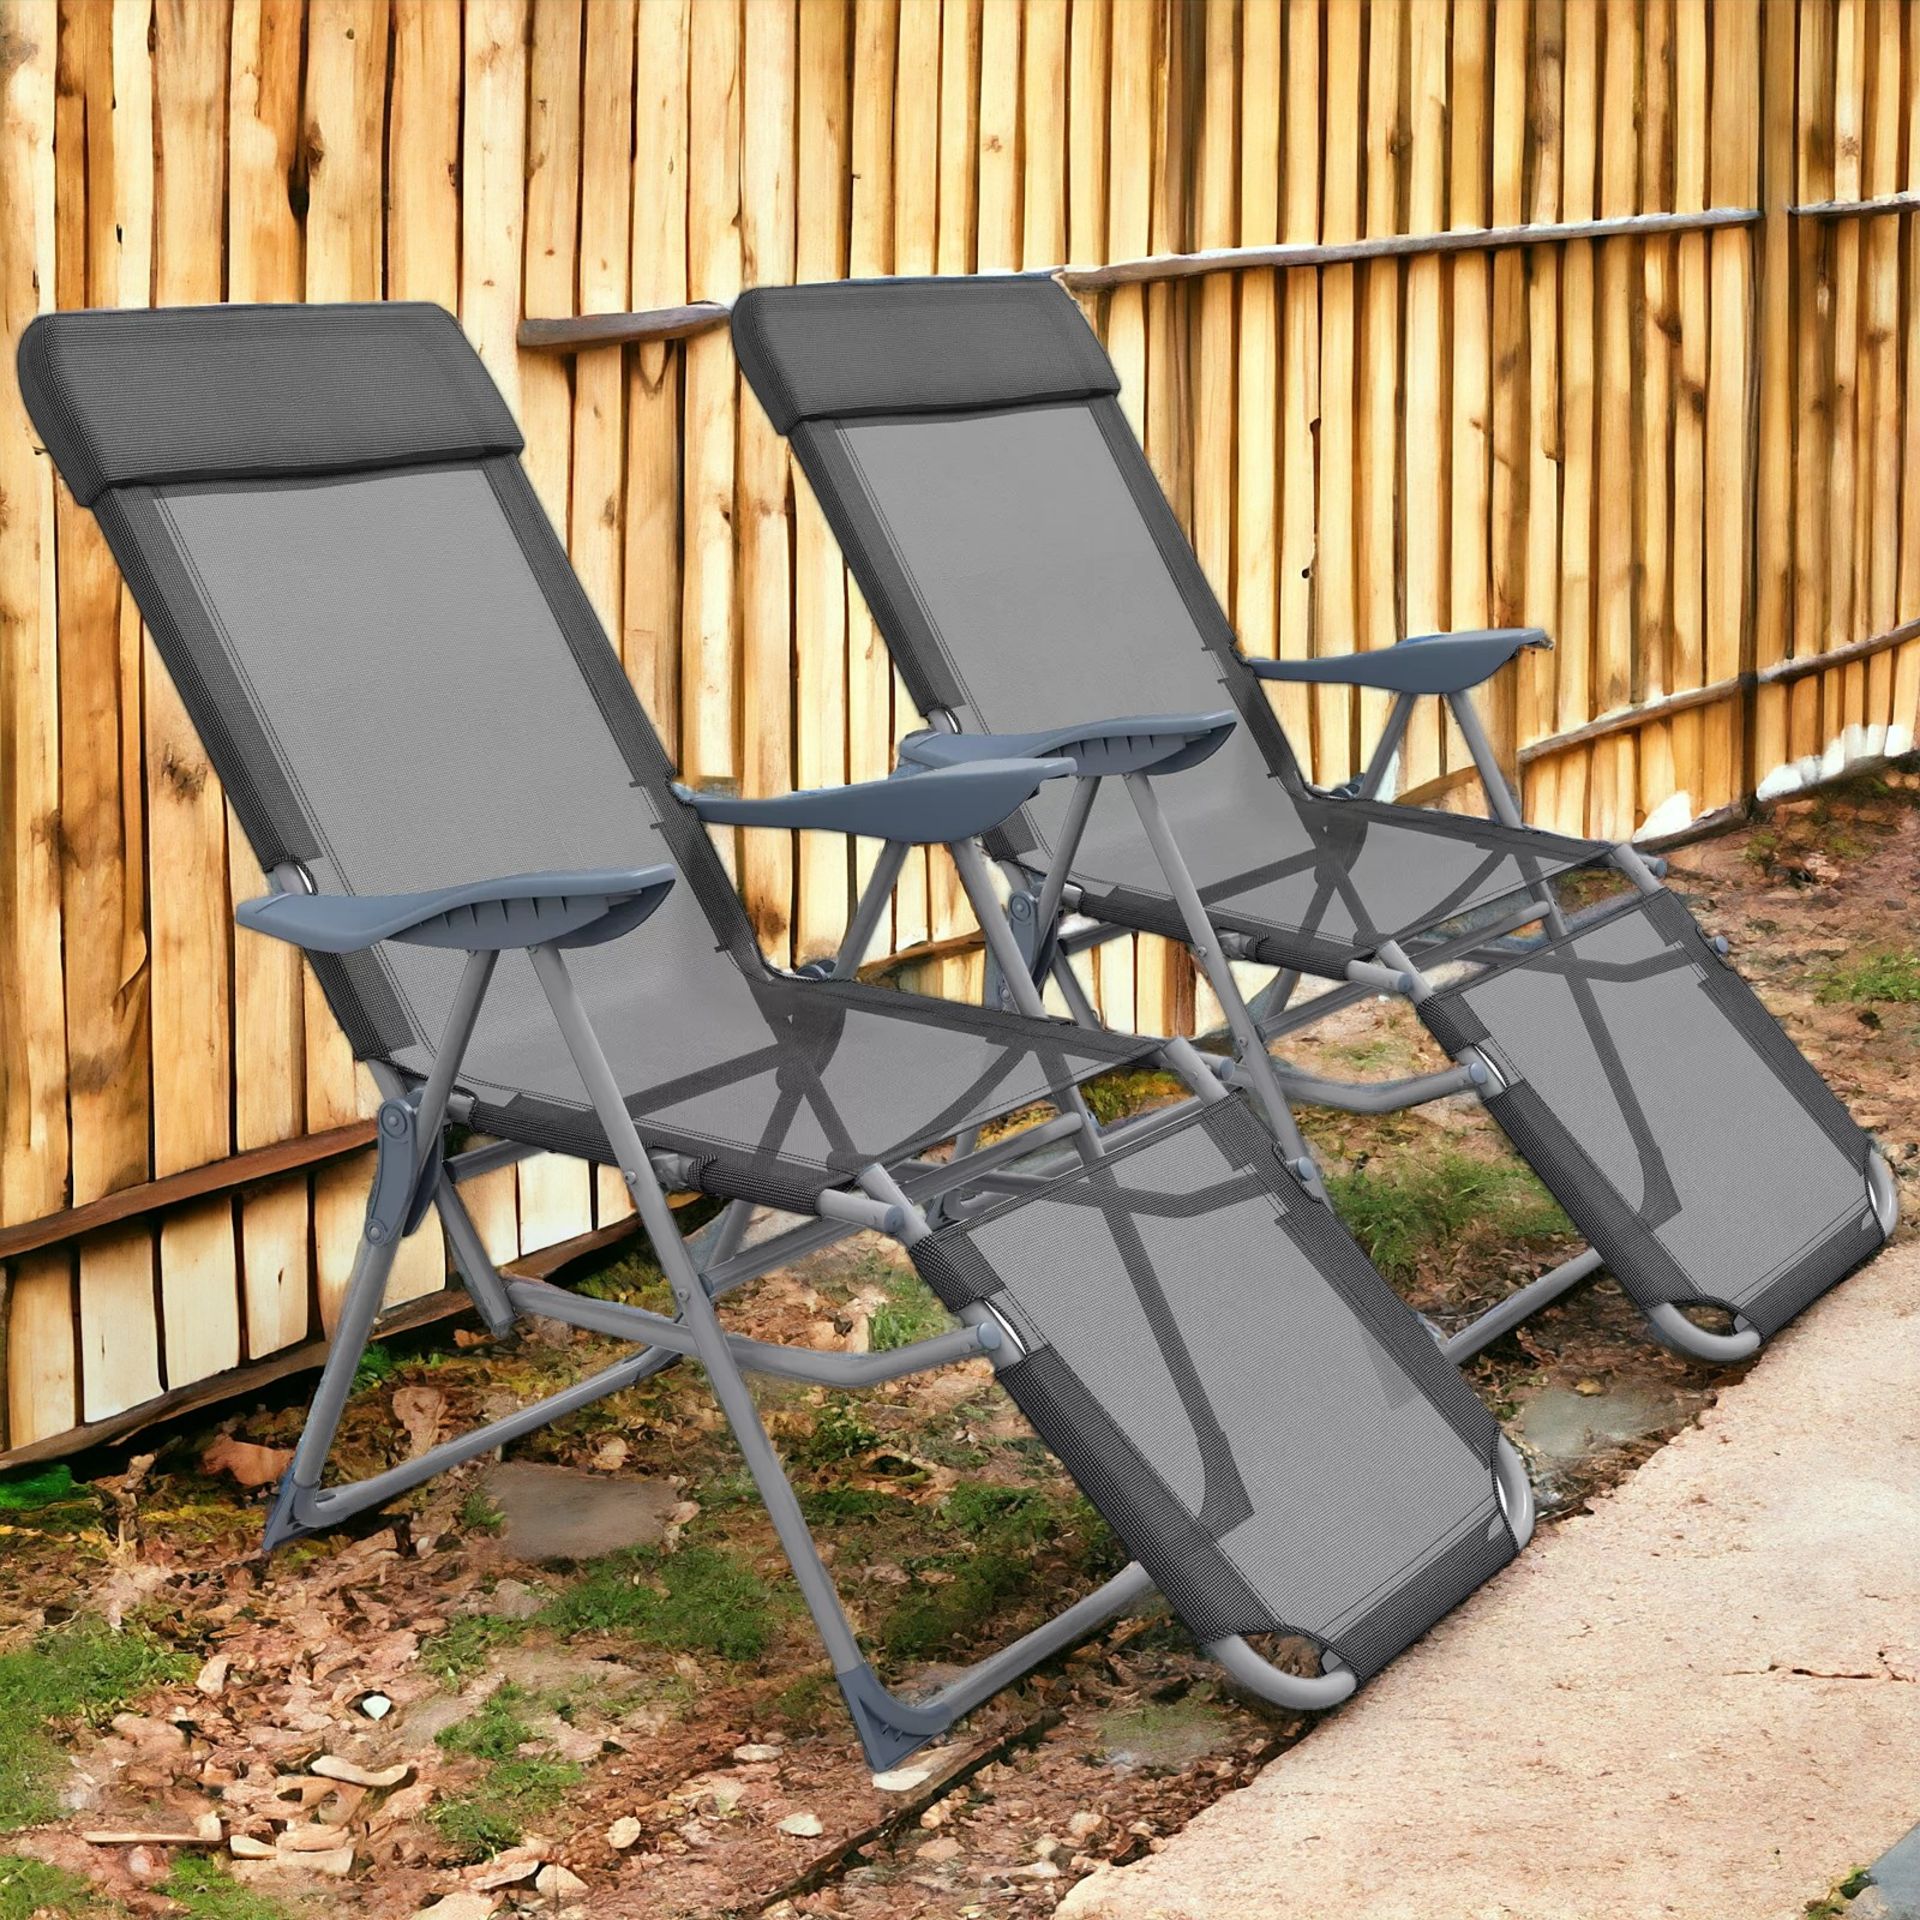 FREE DELIVERY- BRAND NEW RECLINING GARDEN CHAIRS SET OF 2 W/ 5-LEVEL BLACK